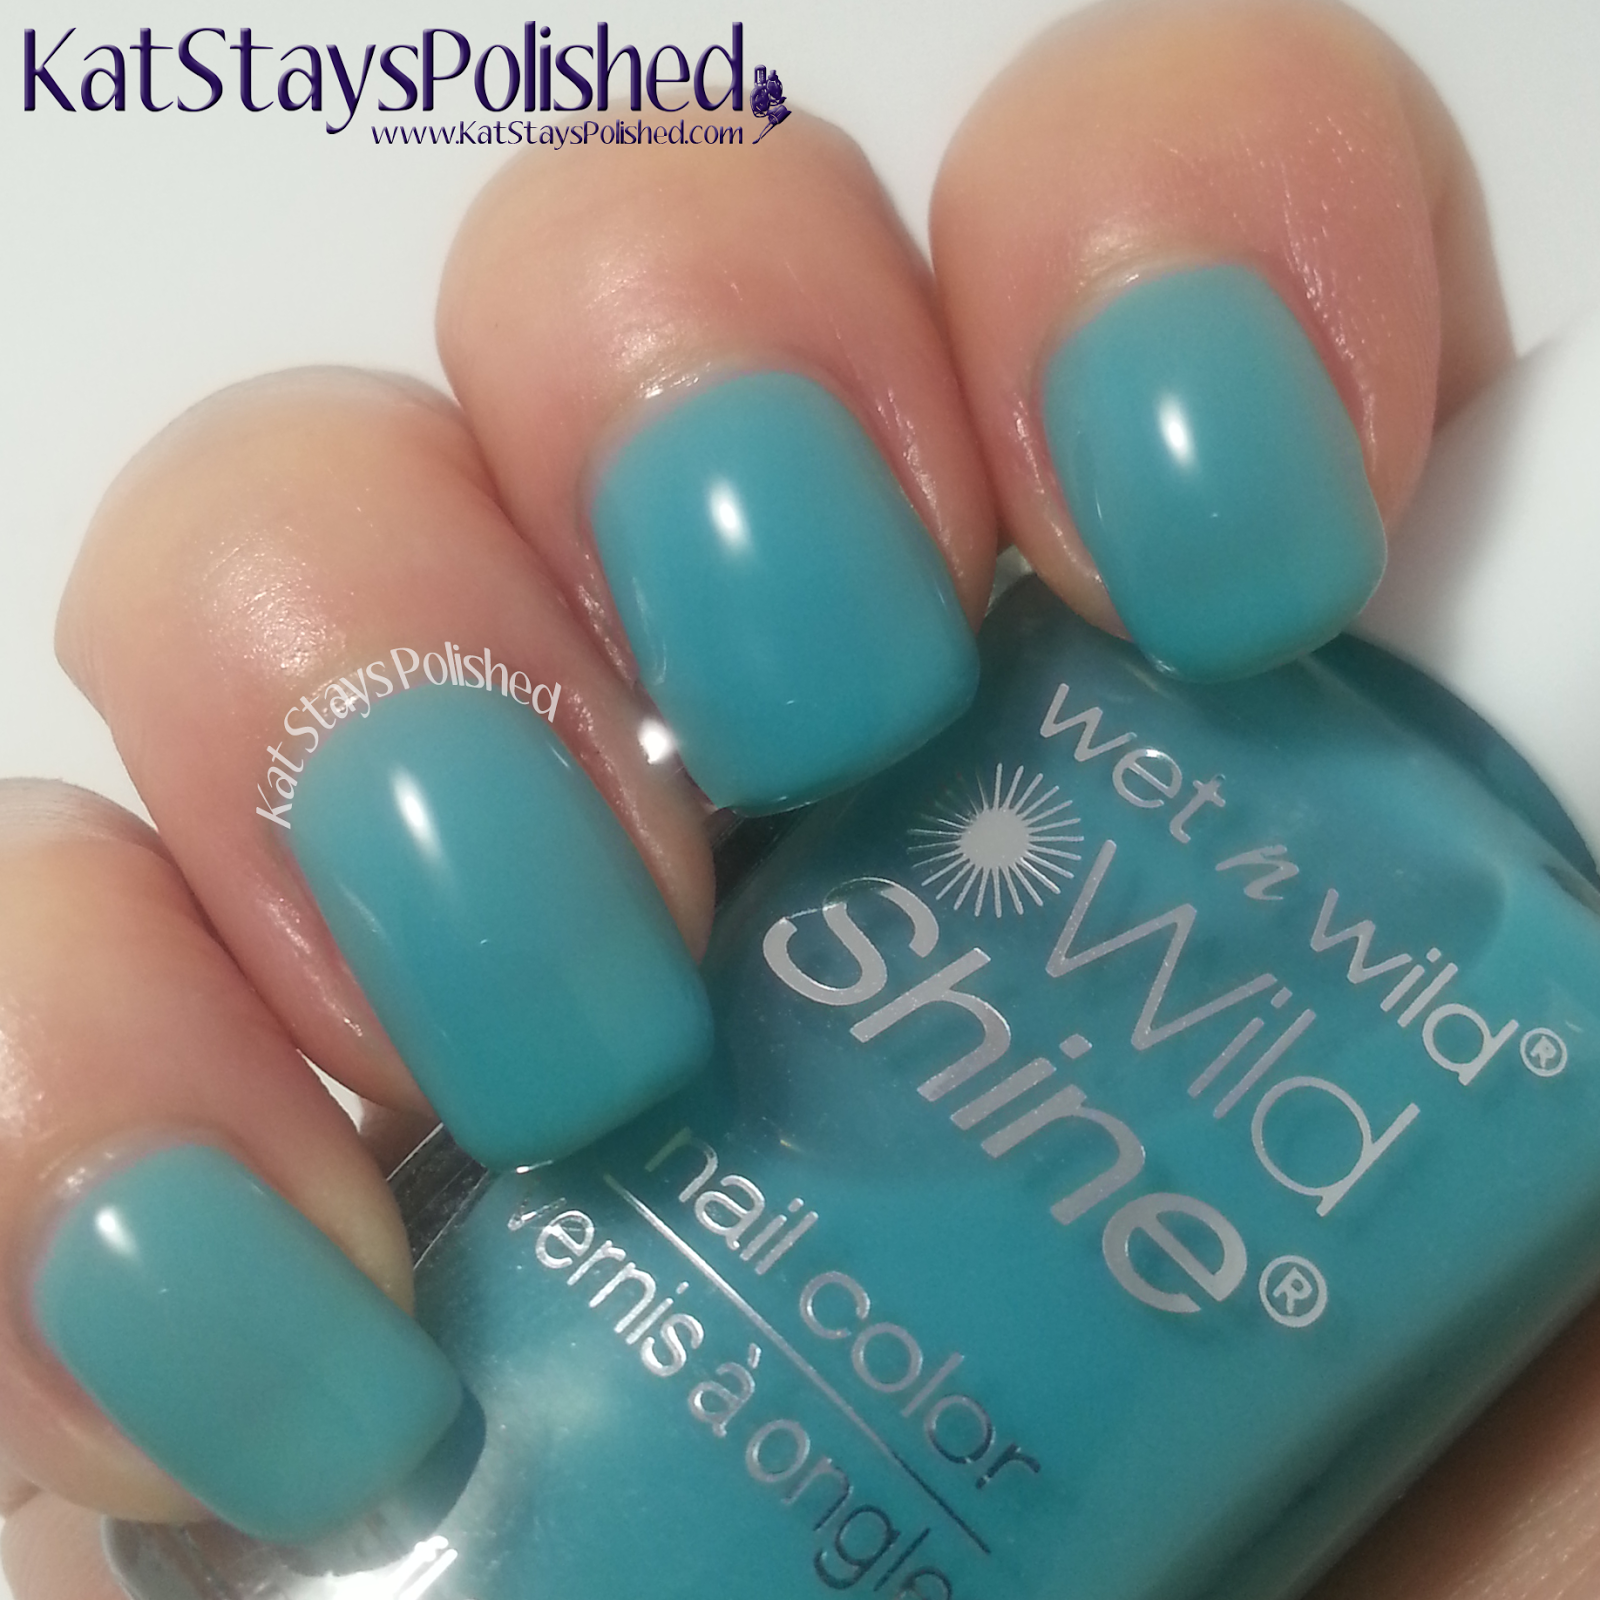 Wet n Wild Summer Festival Nail Color - Gyp-Sea Green | Kat Stays Polished